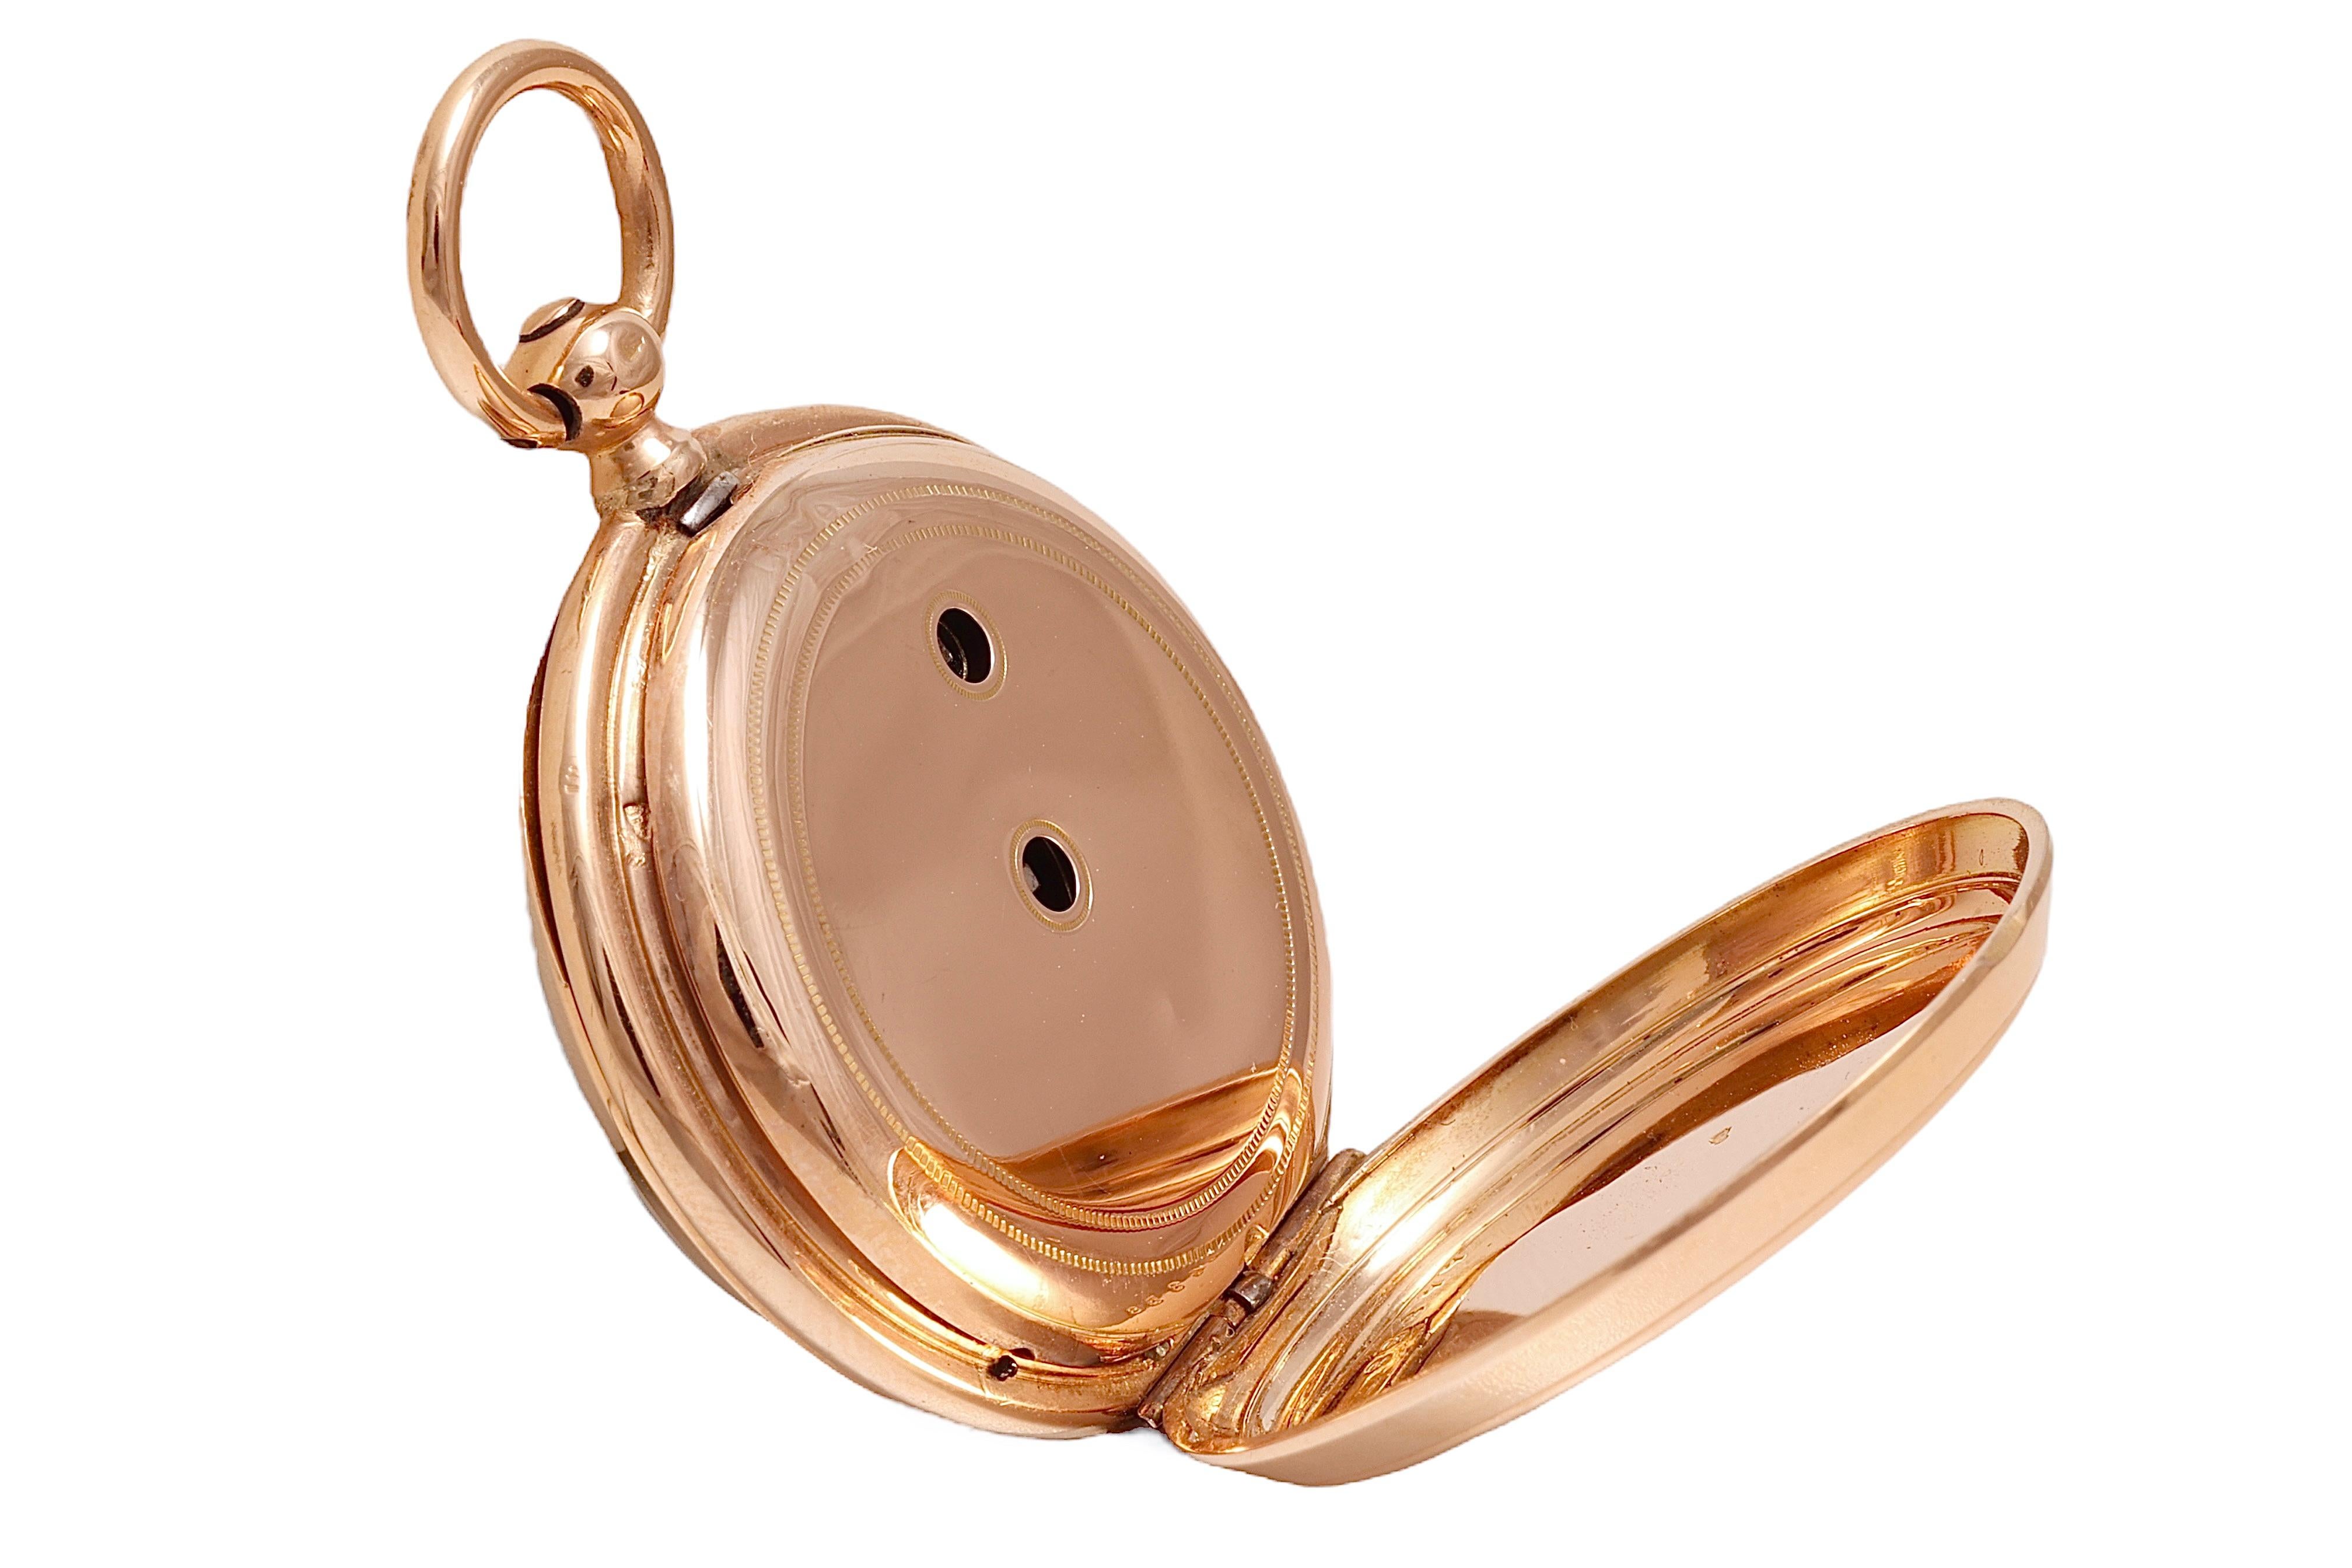 14 Kt Solid Pink Gold Delaunay Chauveau Ruffec pocket watch For Sale 2